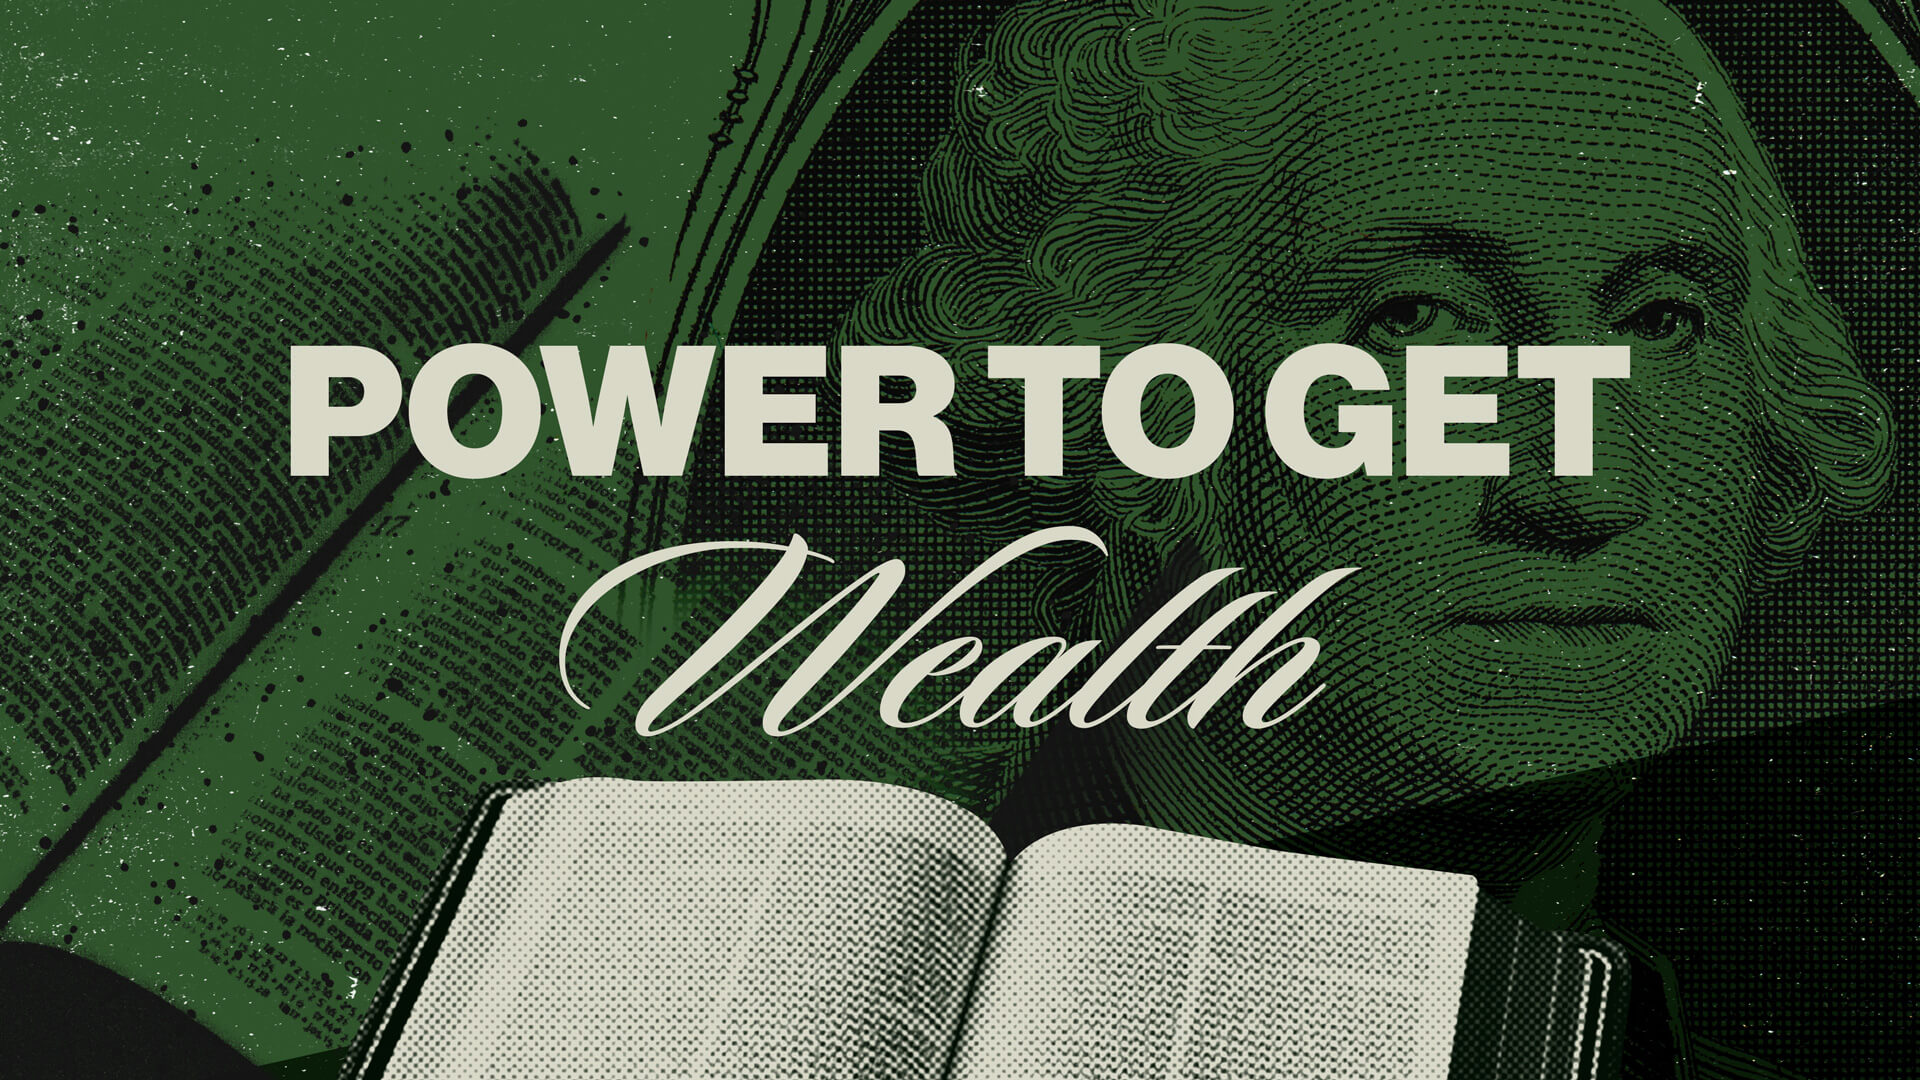 Godly Power To Get Wealth